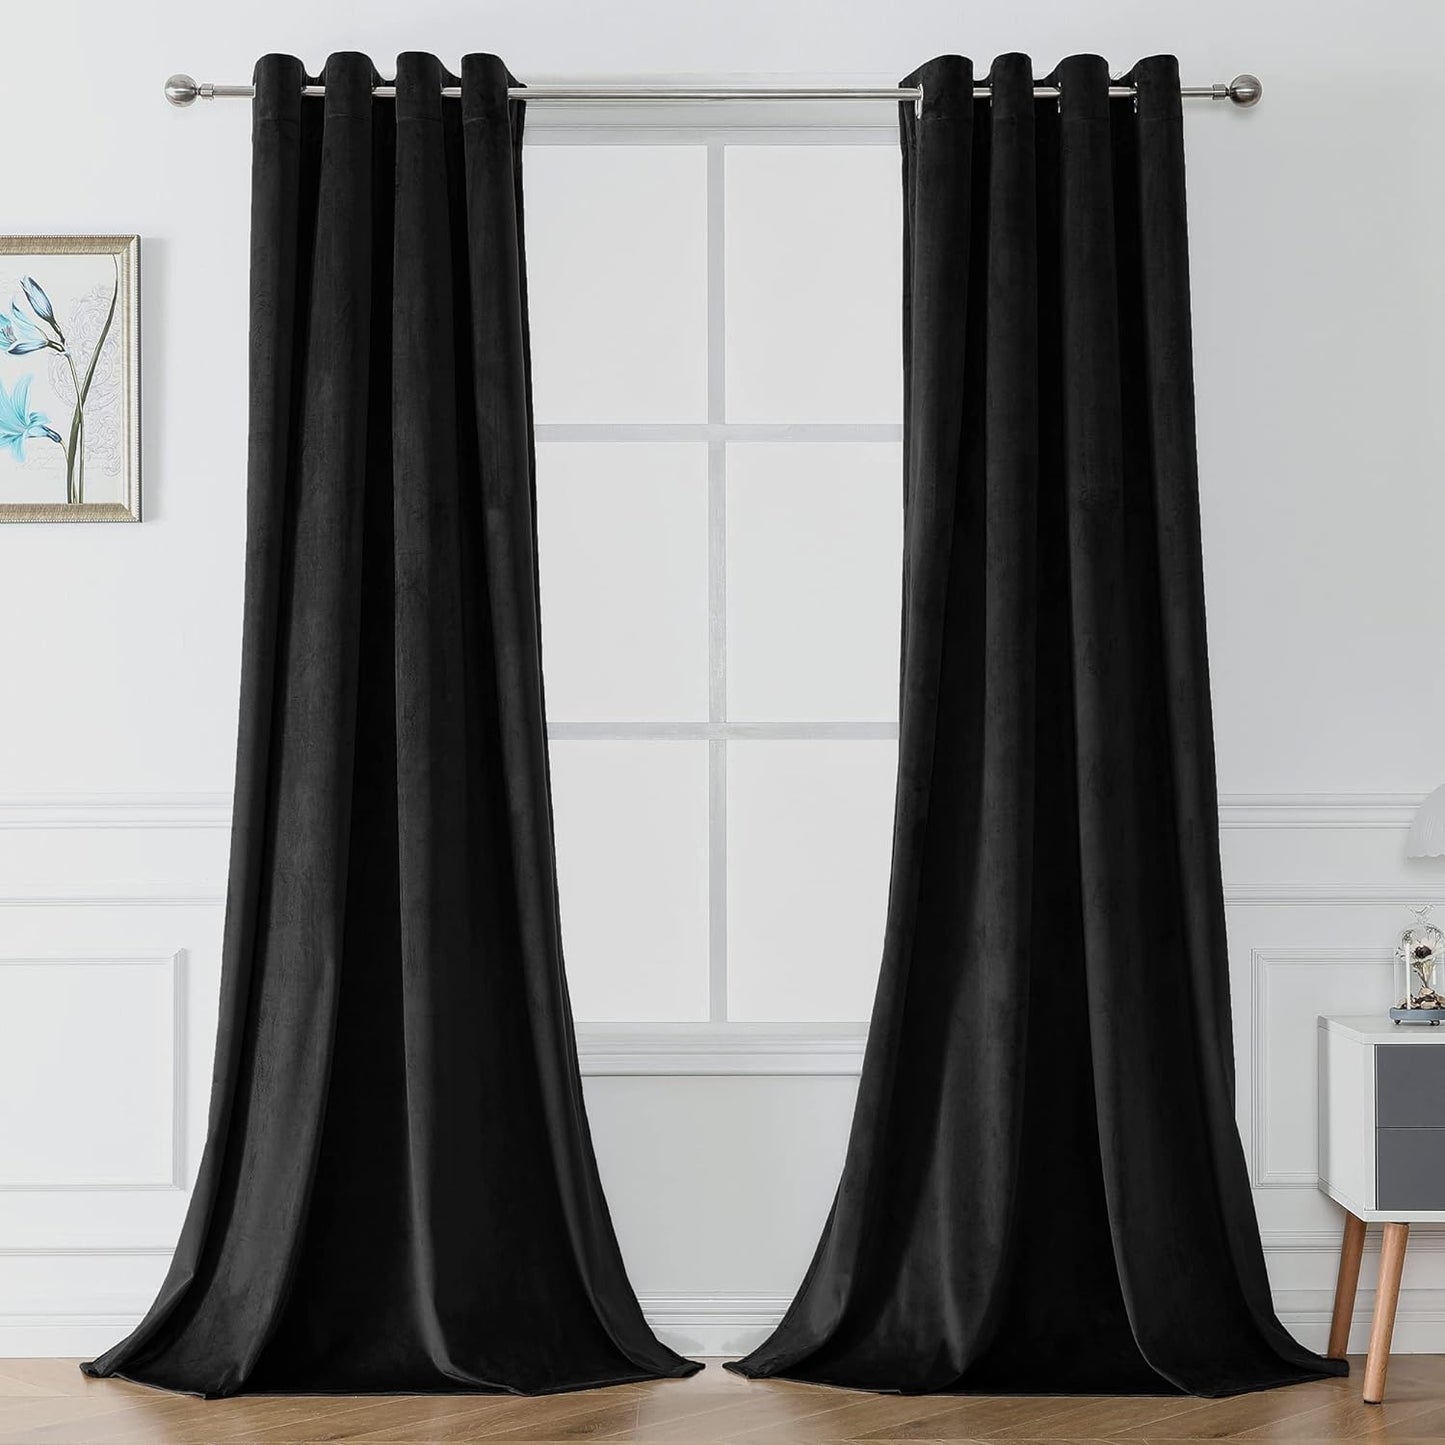 Victree Velvet Curtains for Bedroom, Blackout Curtains 52 X 84 Inch Length - Room Darkening Sun Light Blocking Grommet Window Drapes for Living Room, 2 Panels, Navy  Victree Black 52 X 120 Inches 